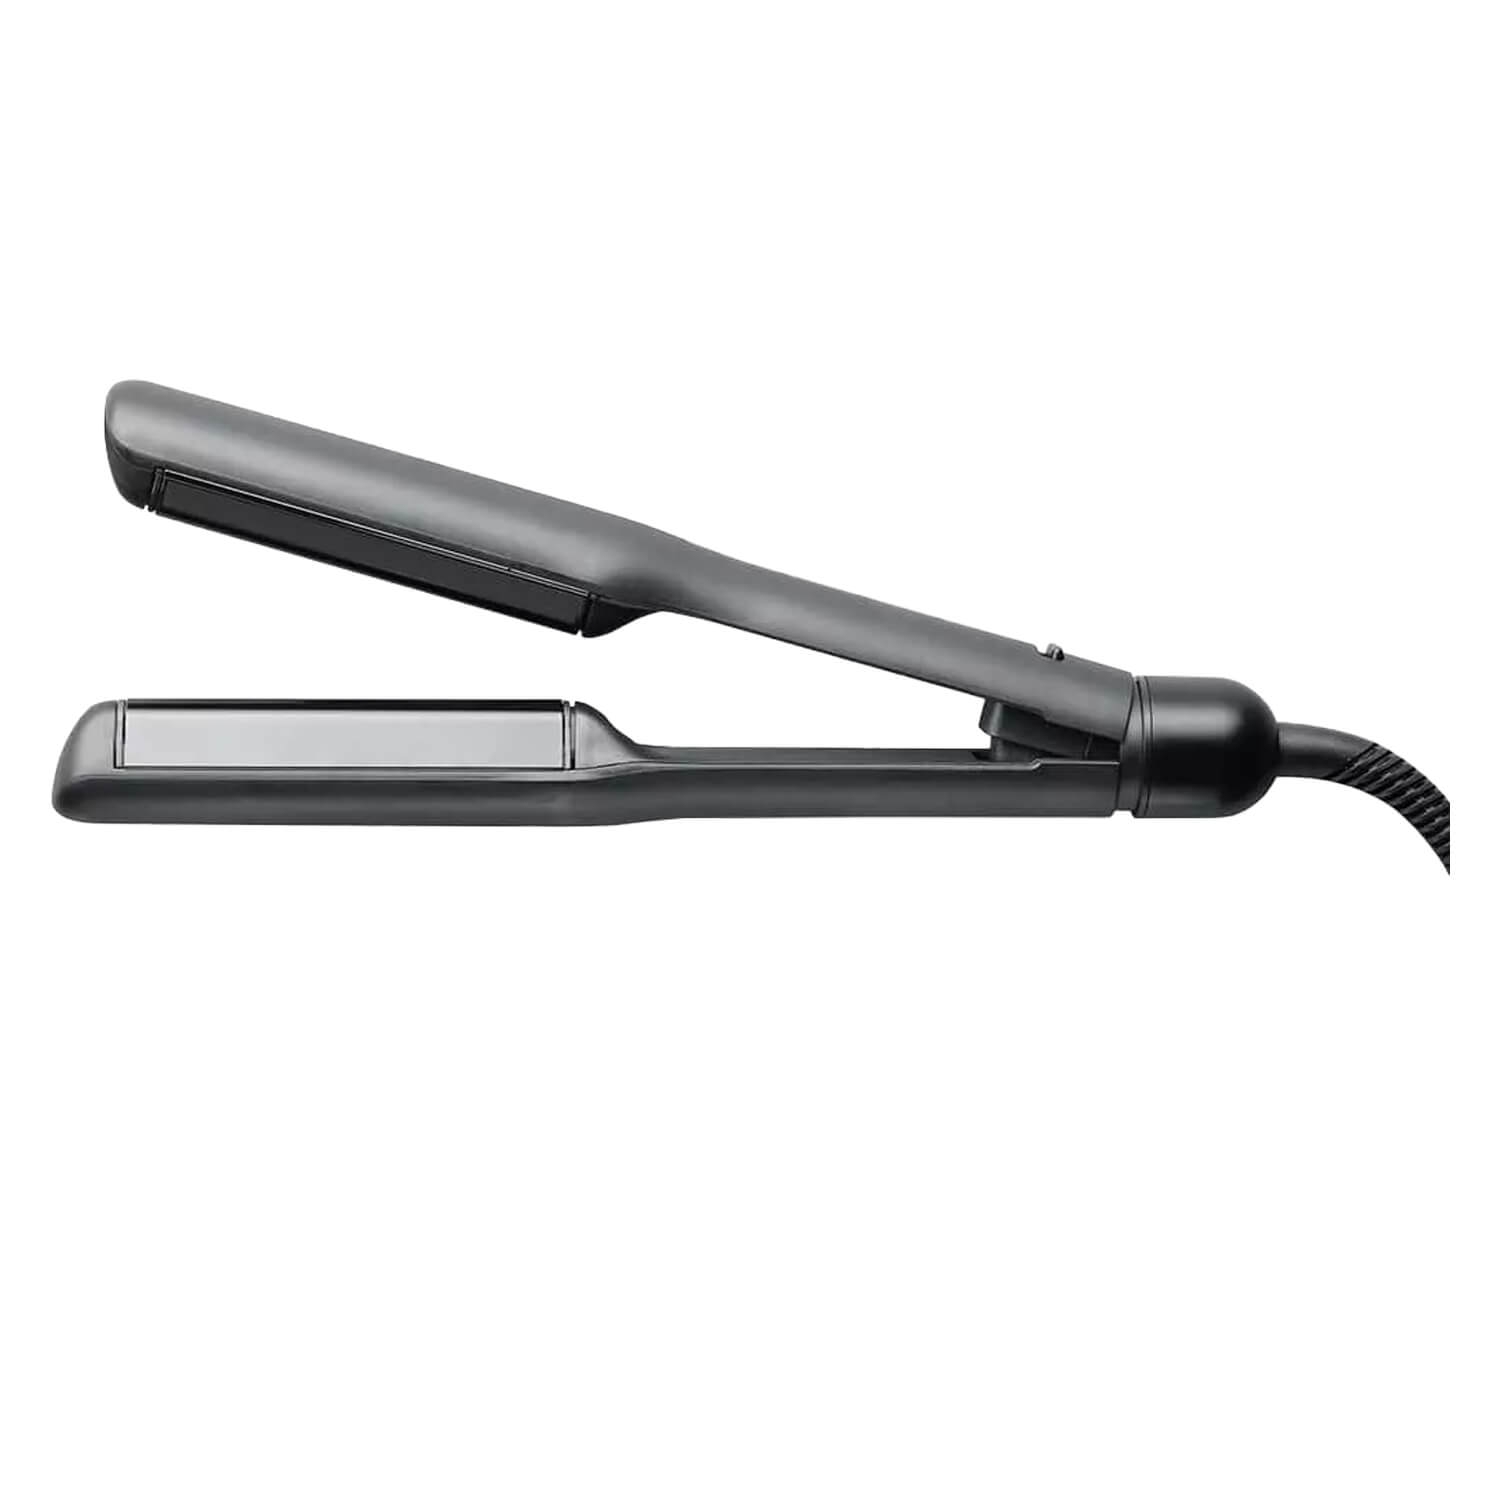 Product image from HH Simonsen Electricals - ROD VS9 Curling Iron